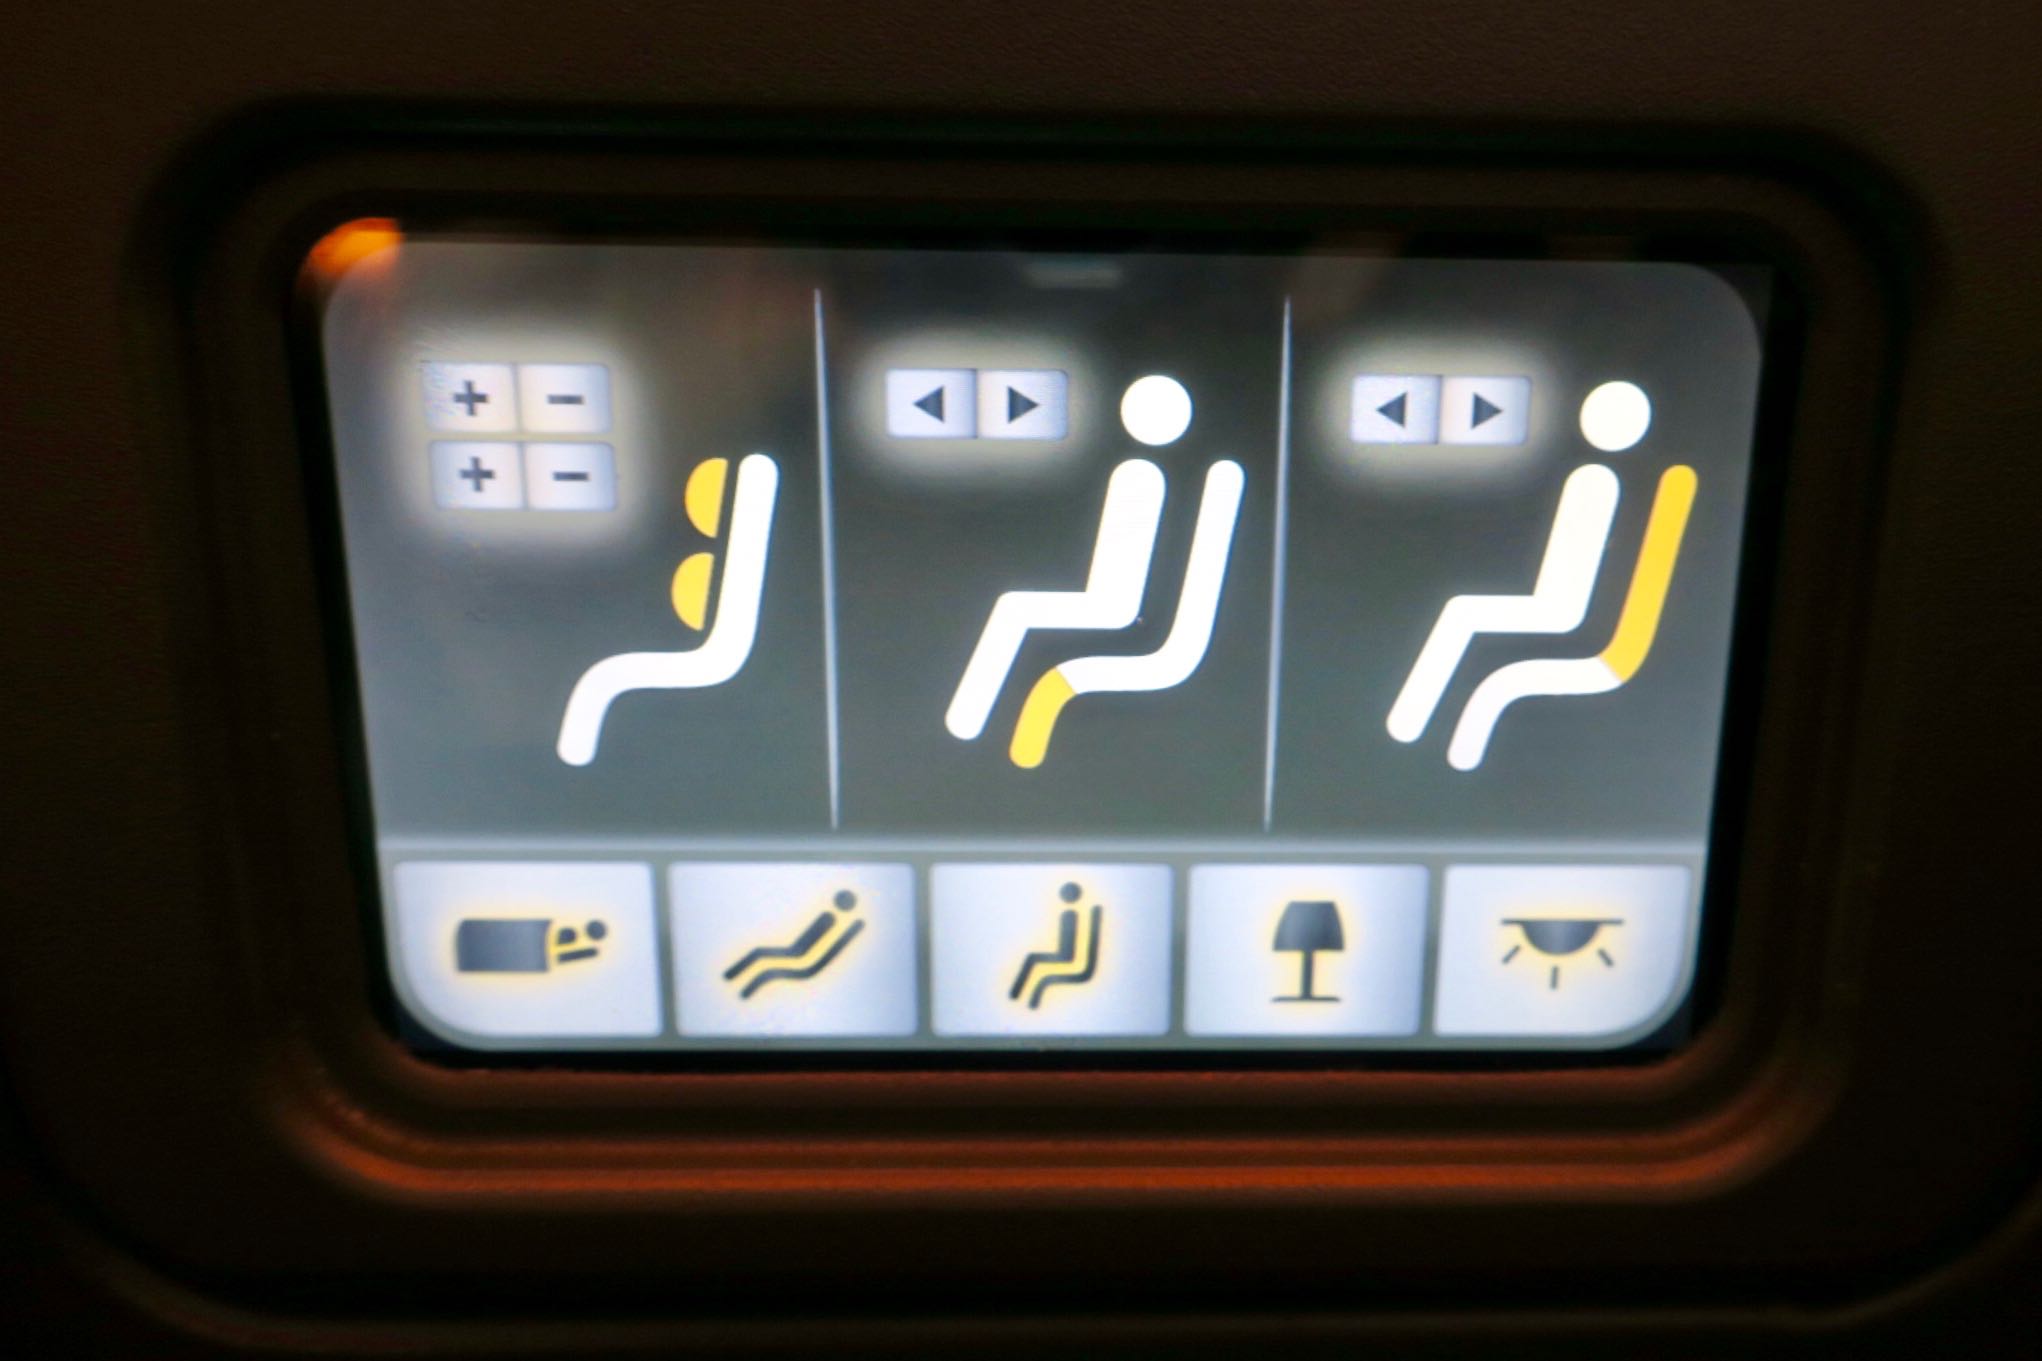 China Airlines Business Class seat controls